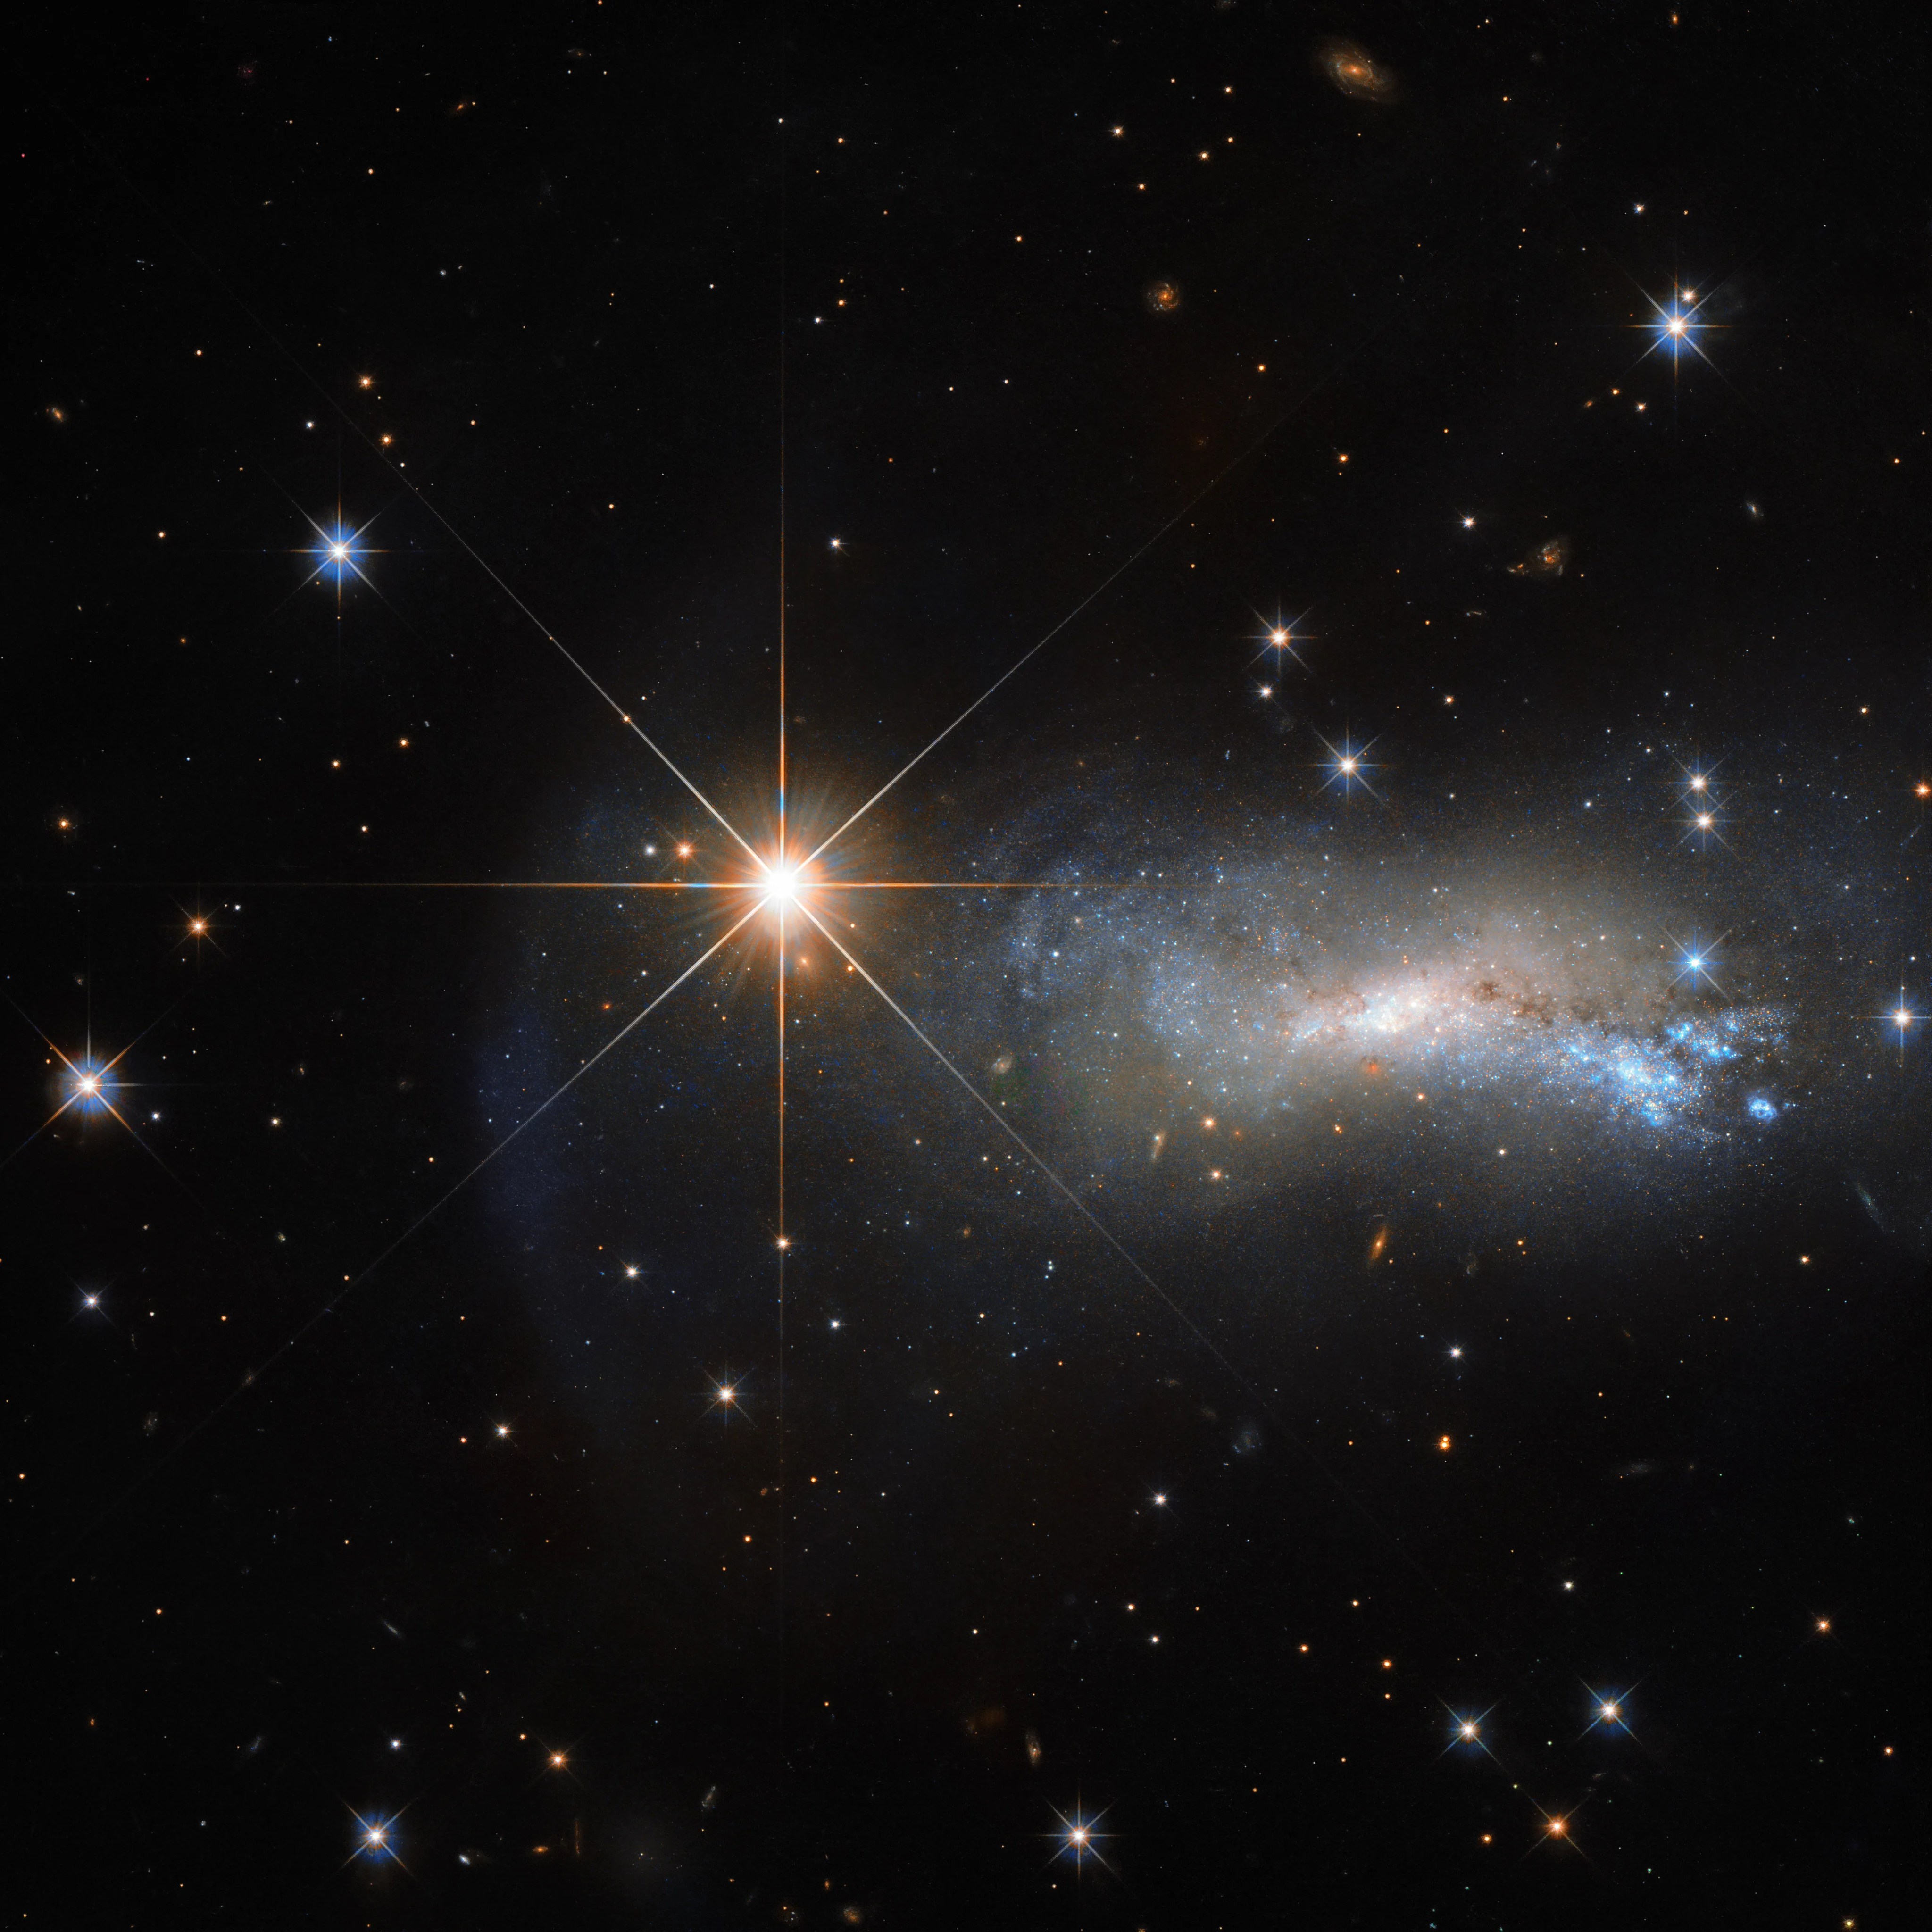 a bright star and a dimmer galaxy.